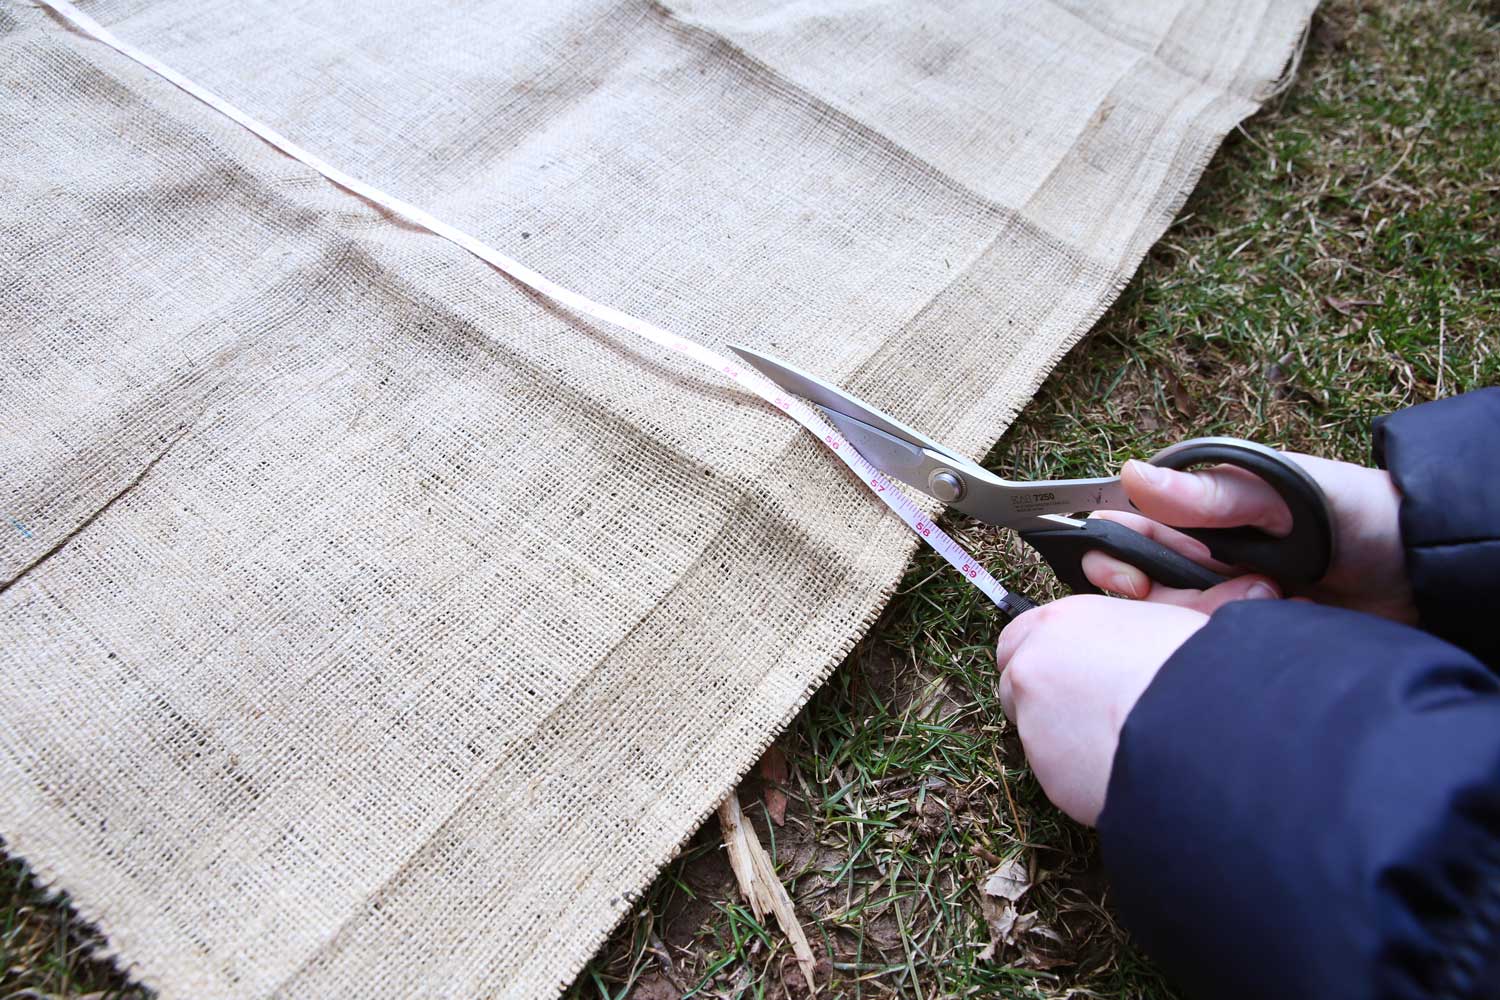 Hands using scissors to cut into burlap, using a soft tape measure as a cutting guide